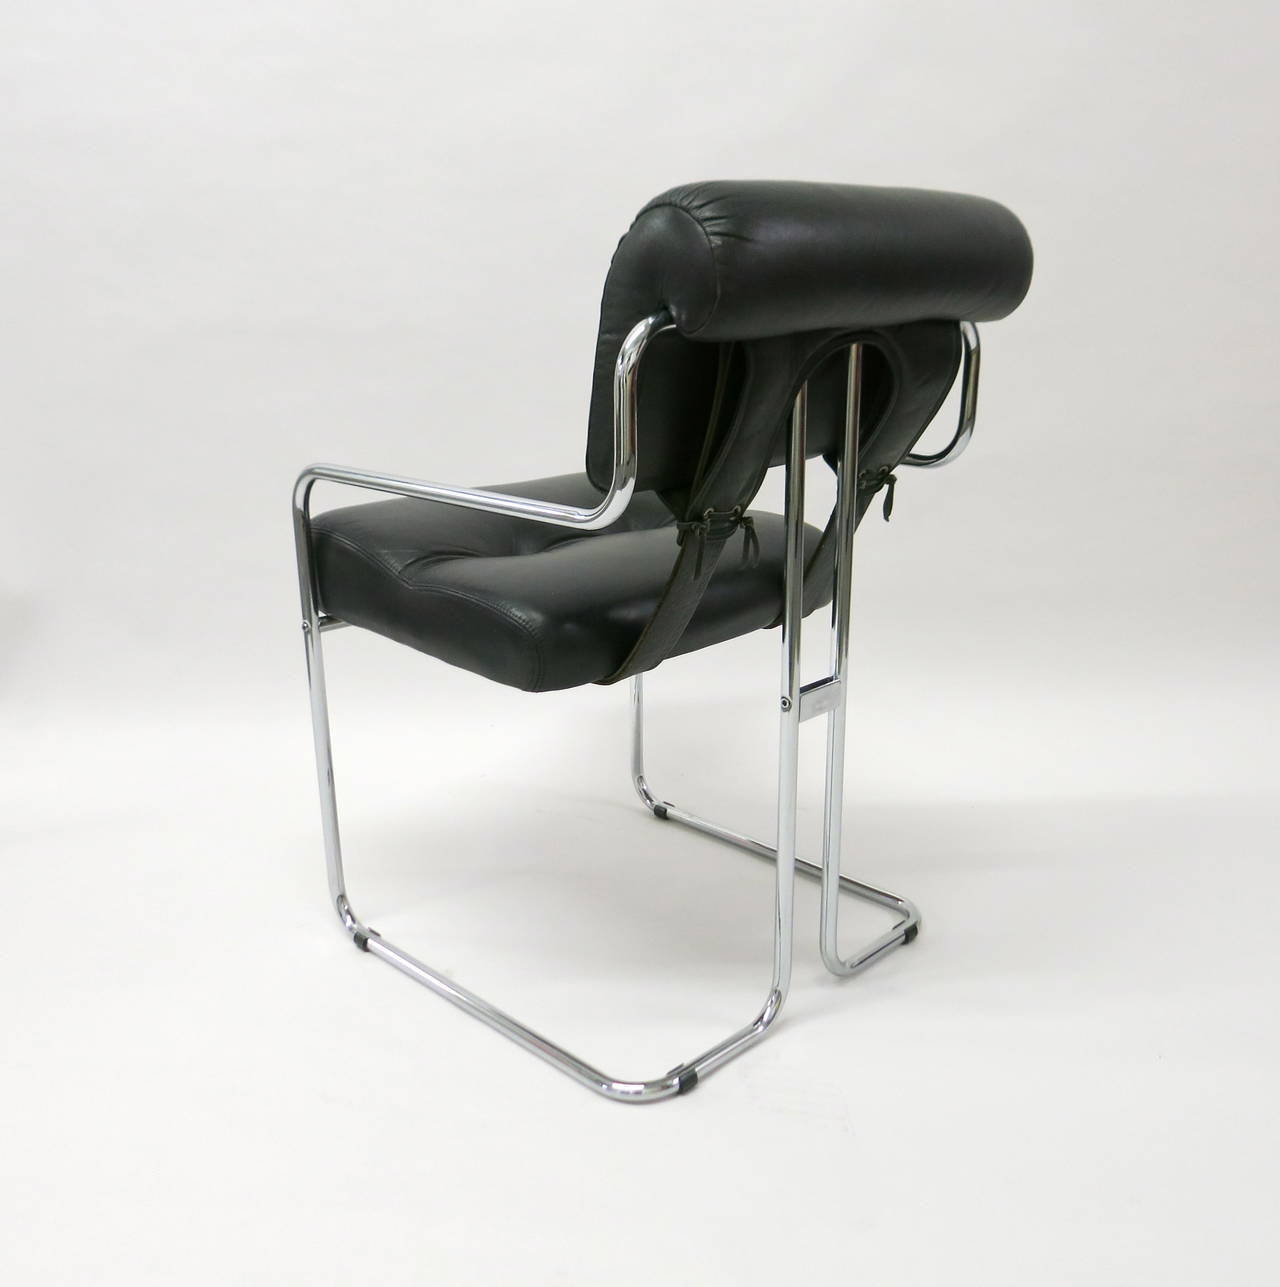 Late 20th Century Six Tucroma Chairs by Mariani for Pace, Original Leather, circa 1980, Italy